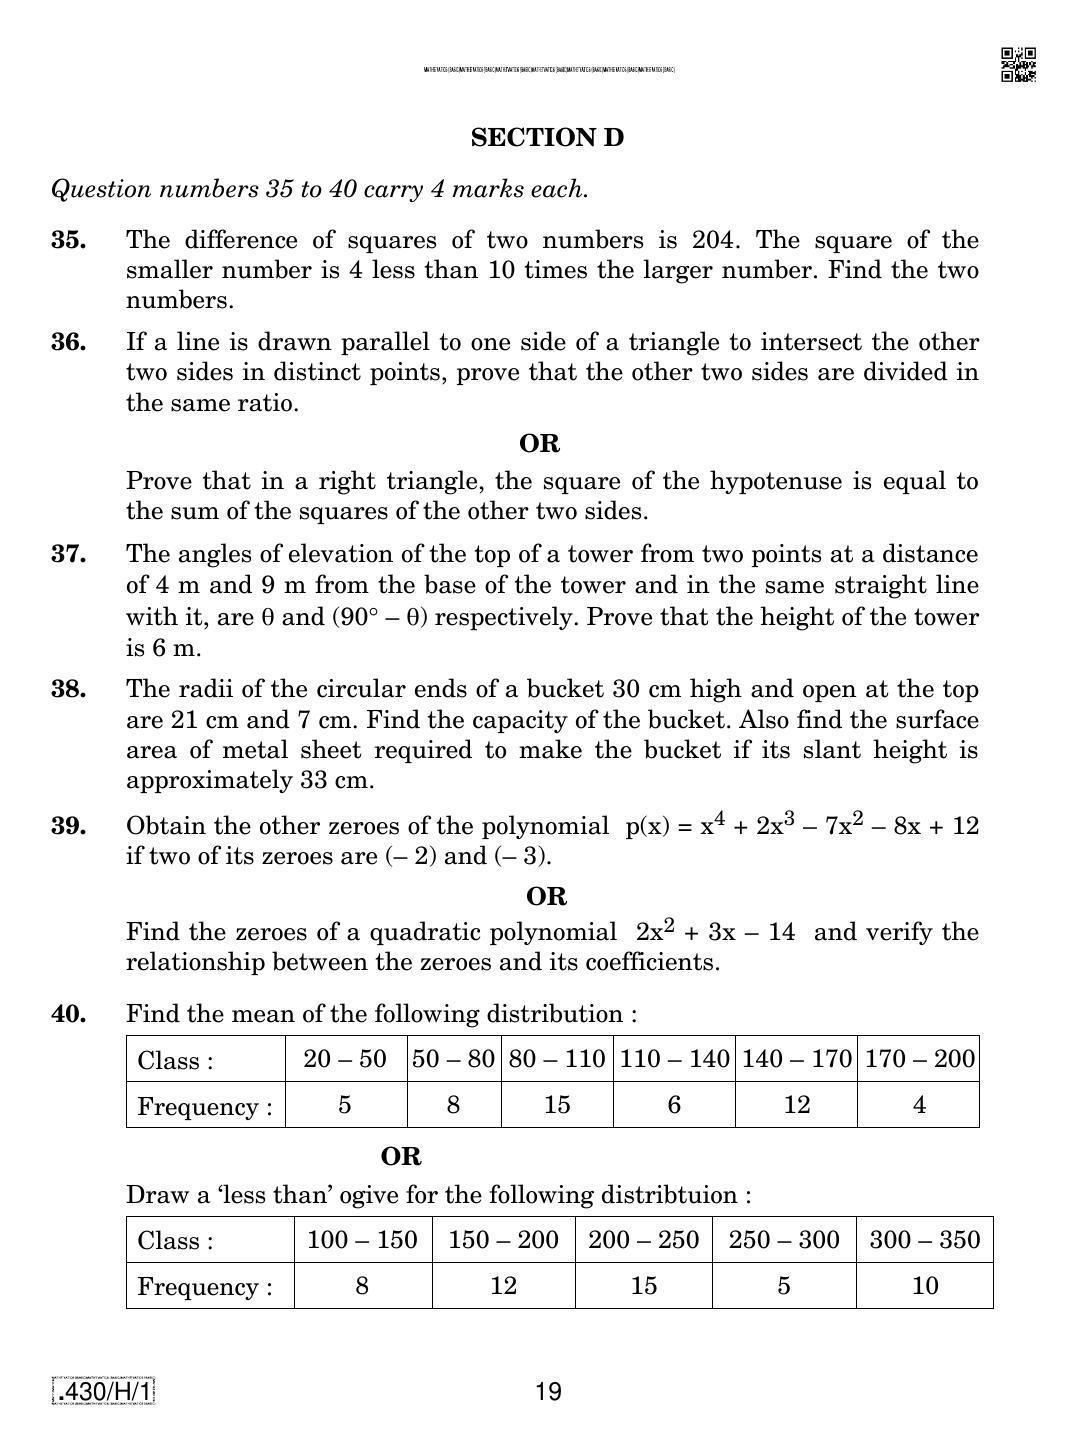 CBSE Class 10 430-C-1 - Maths (Basic) 2020 Compartment Question Paper - Page 19